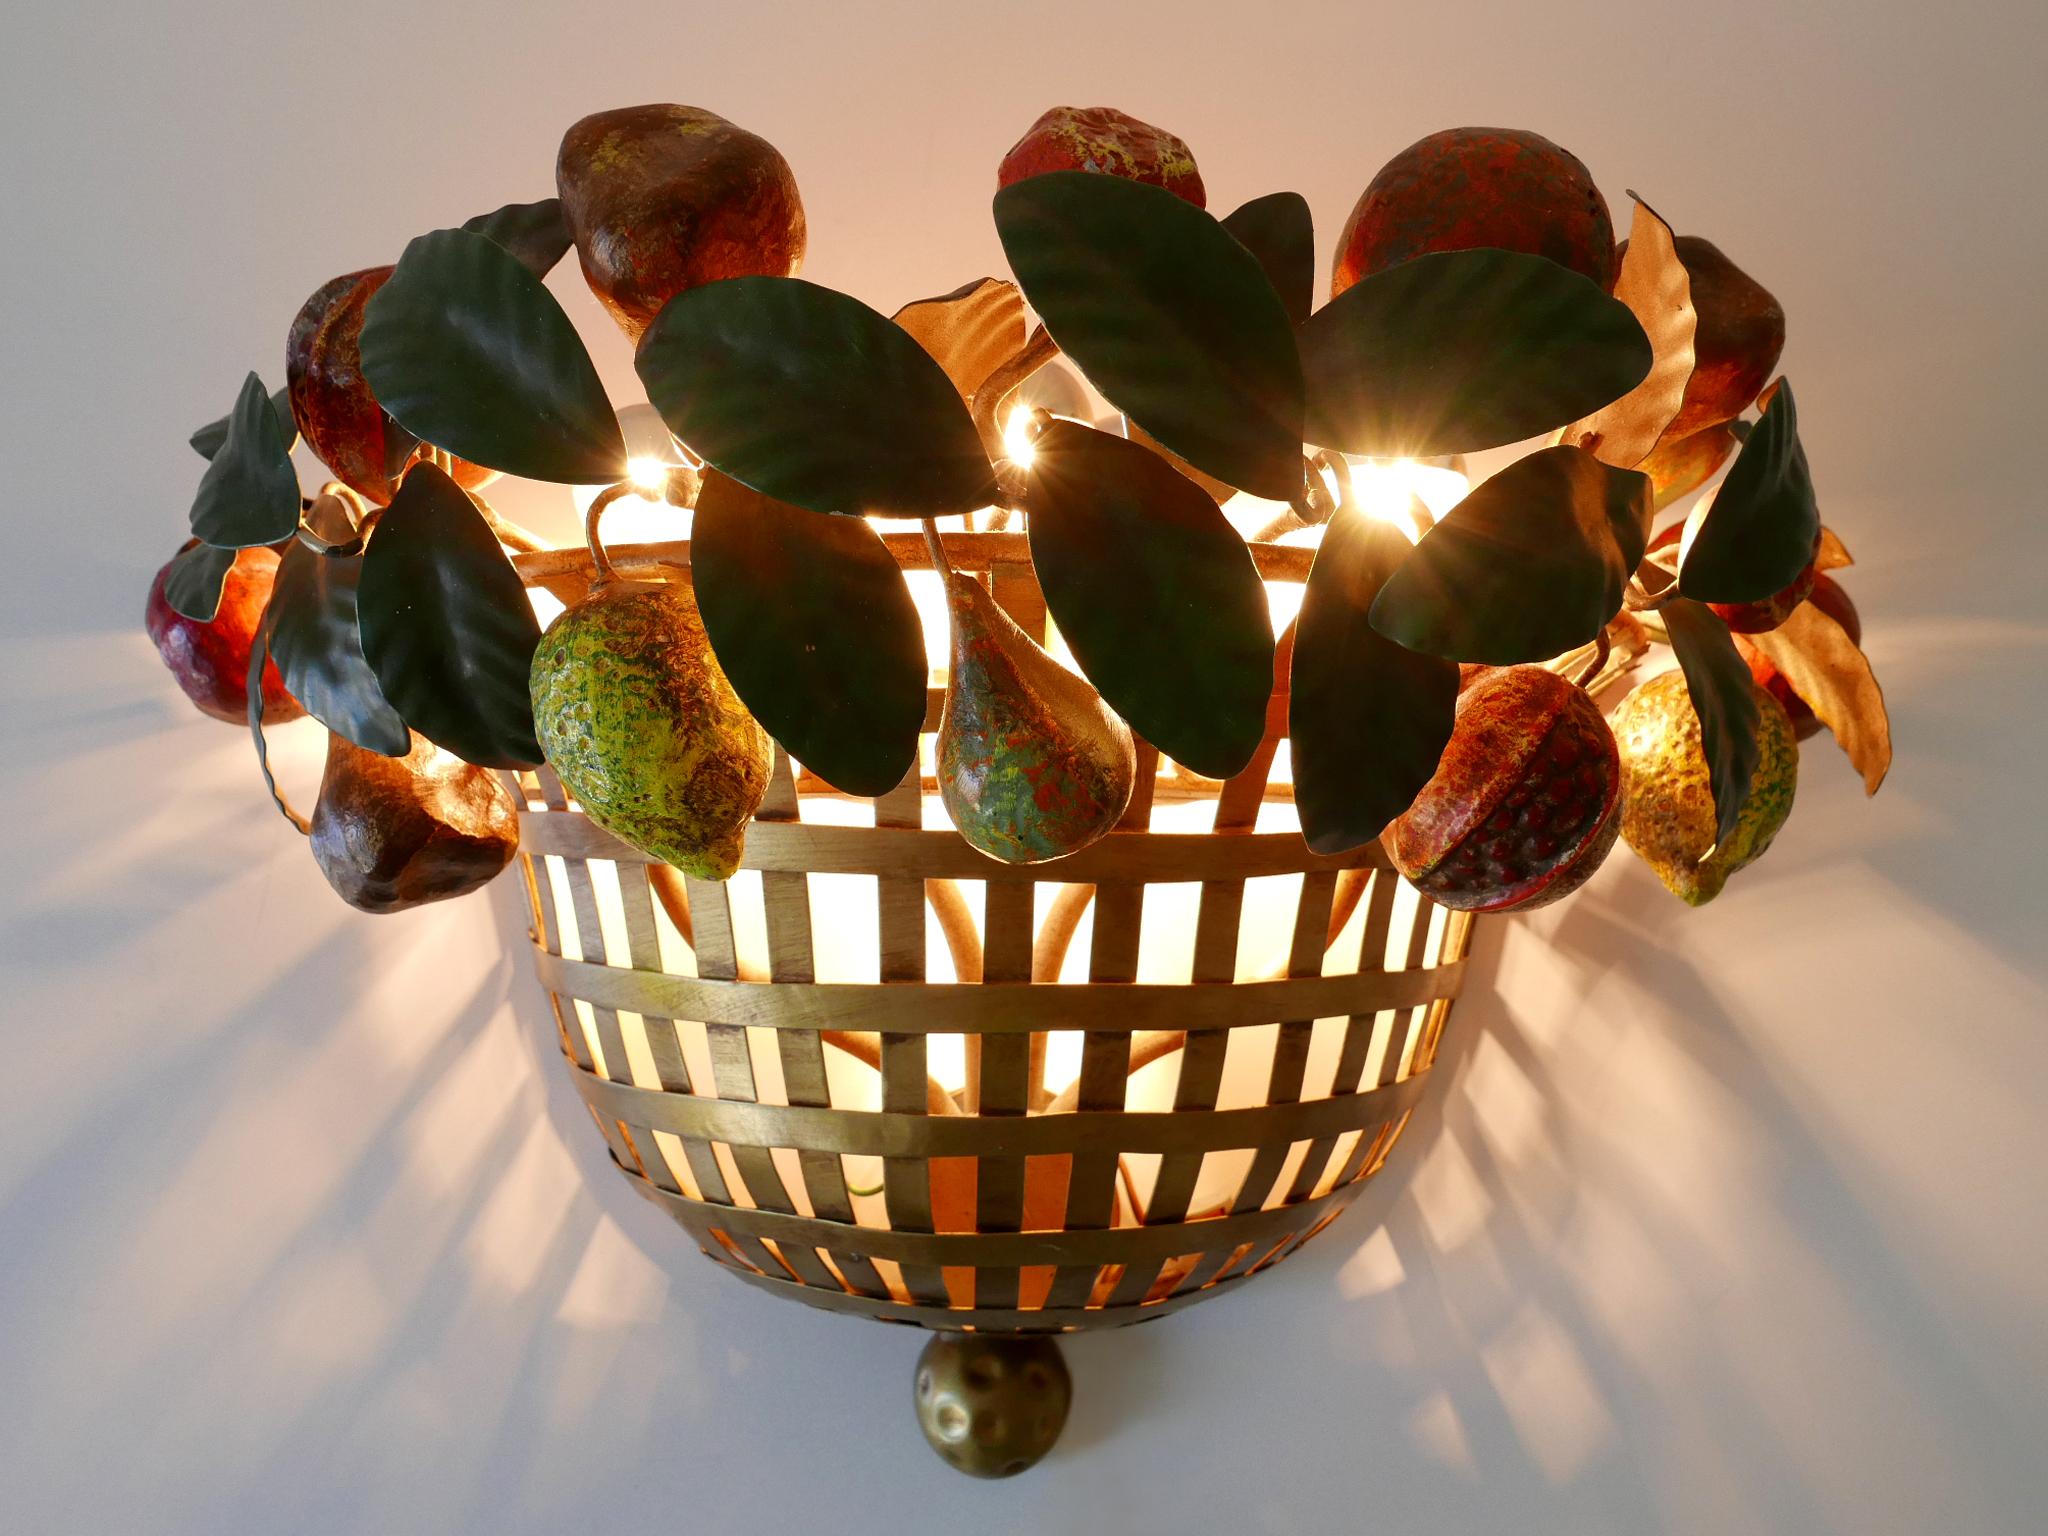 Rare, amazing and highly decorative Mid-Century Modern five-flamed wall fixture or sconce 'fruit basket'. Designed and manufactured by Lucienne Monique, Scandicci (Firenze), Italy, 1960s. Manufacturers label reverse.

Executed in metal, the wall